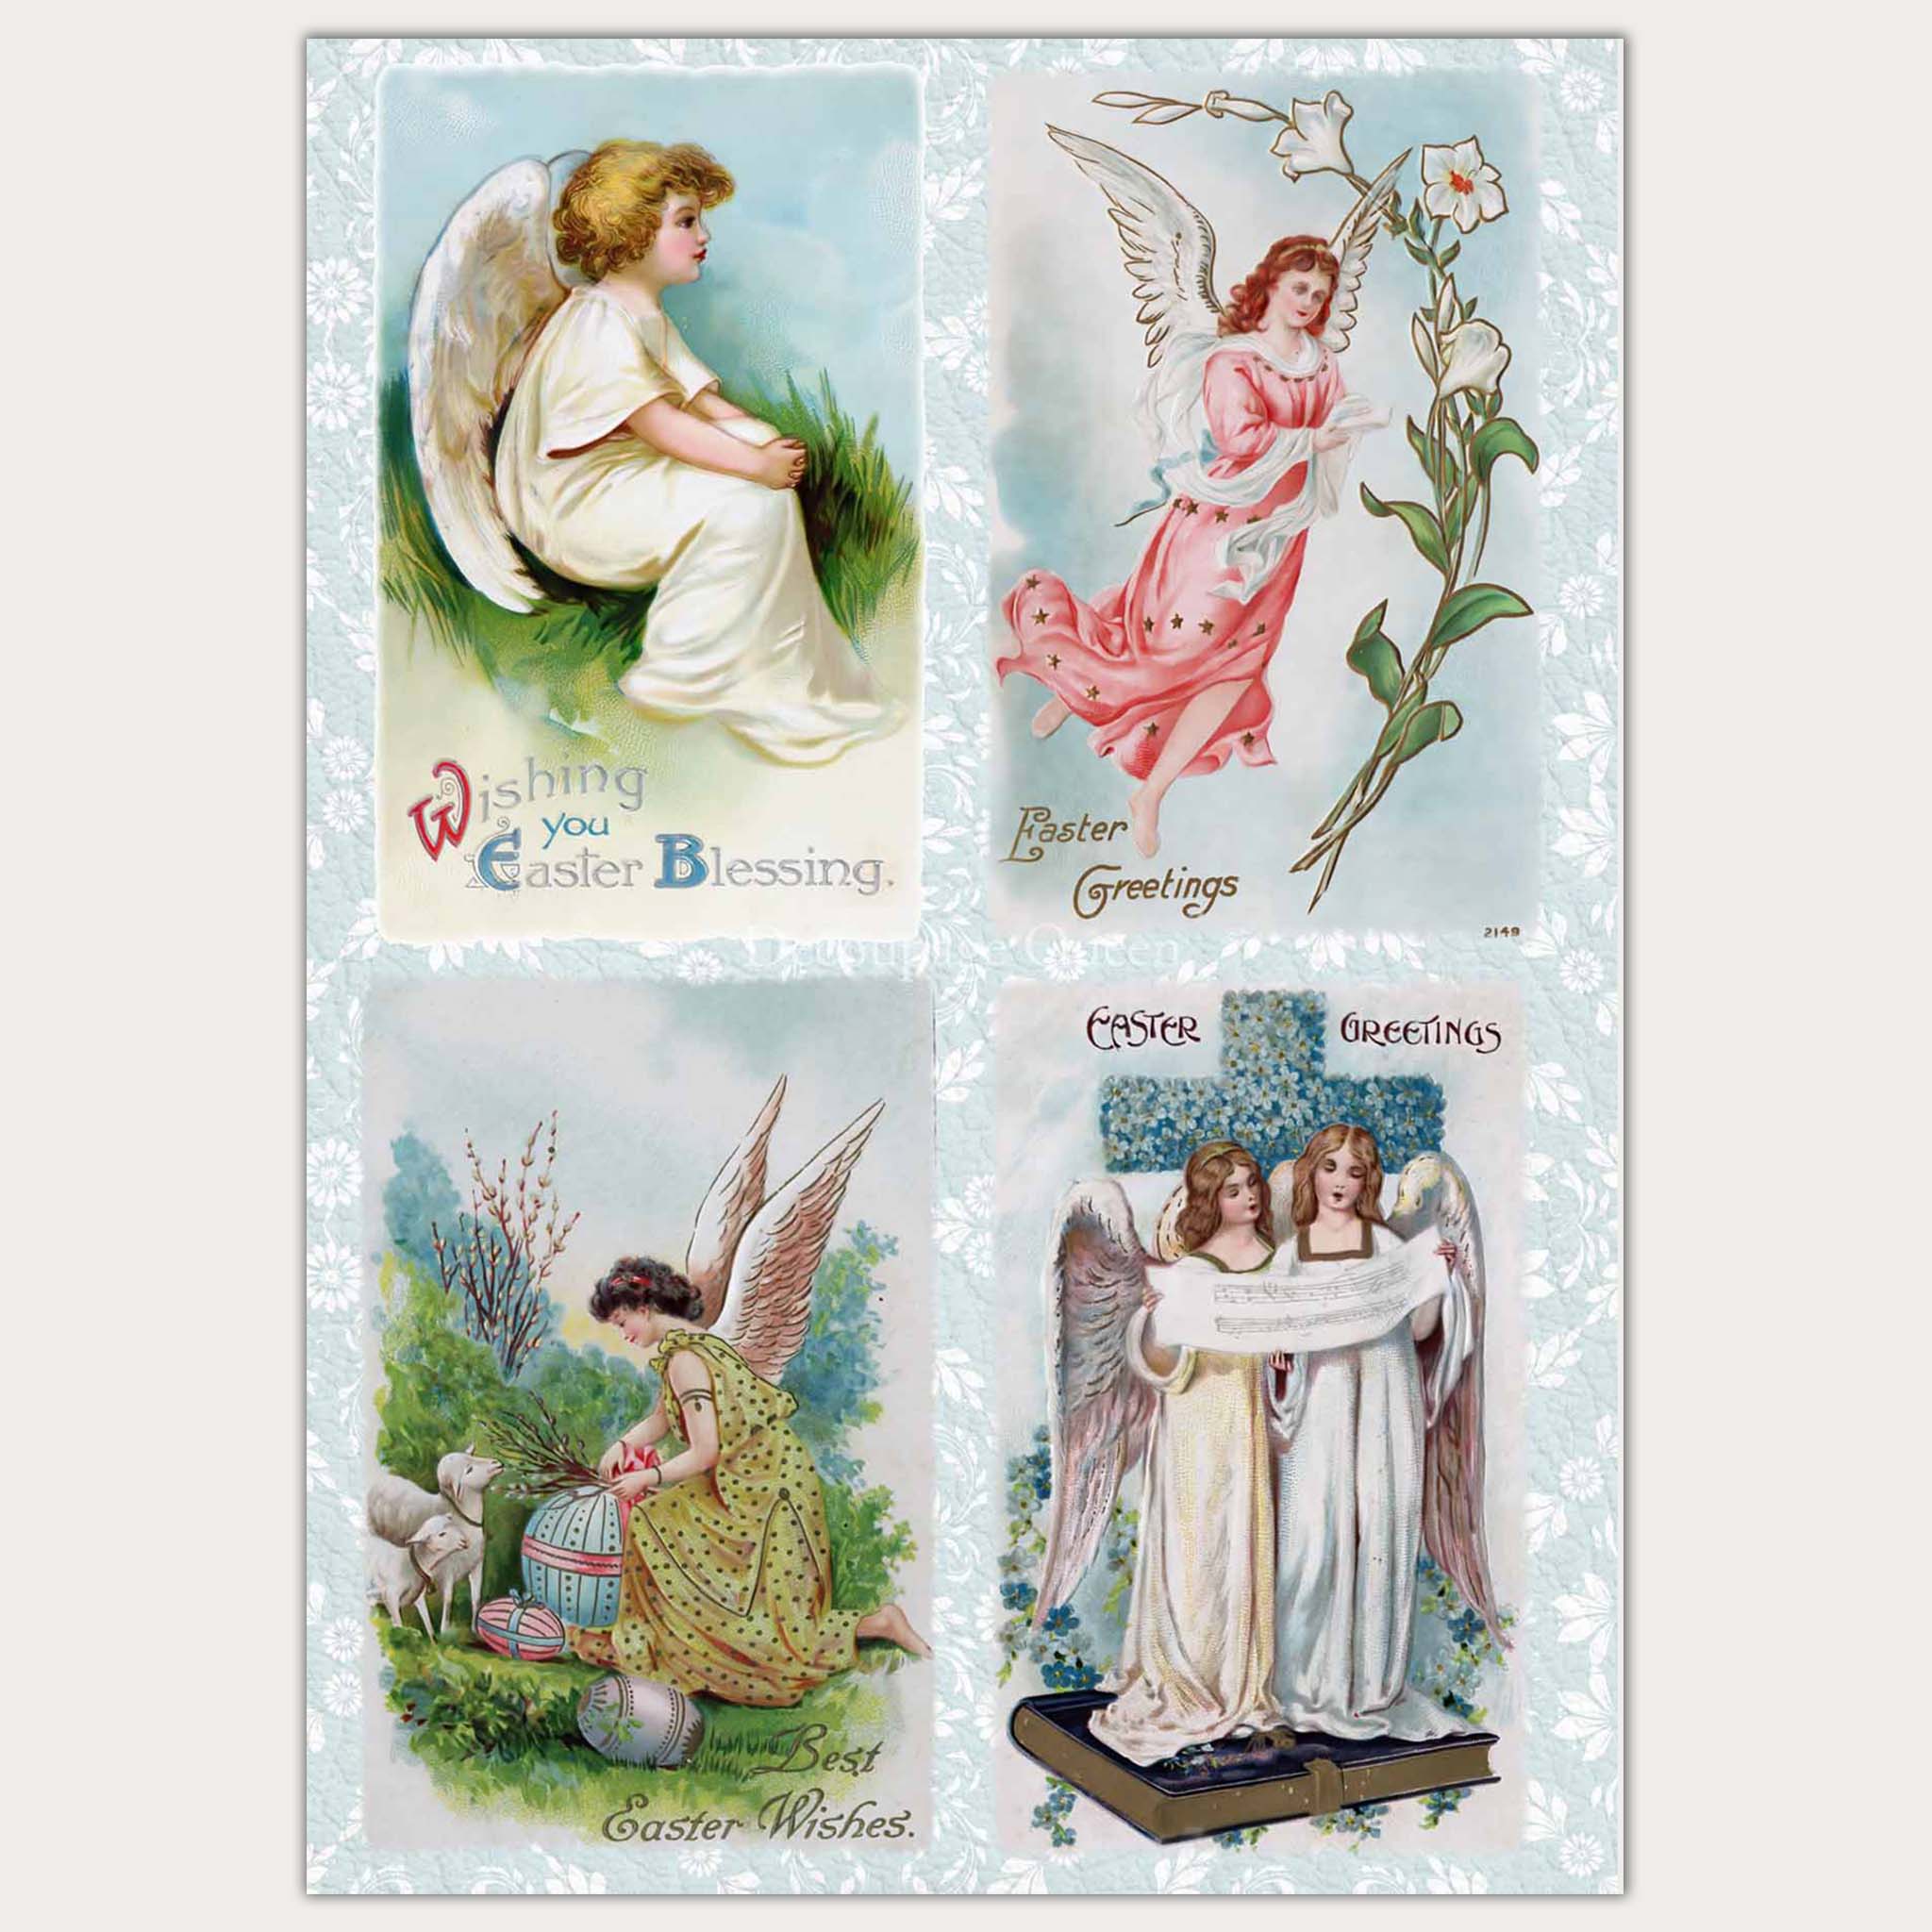 A3 rice paper design that features 4 scenes of Easter angels on a light blue floral background. Cream colored borders are on the sides.